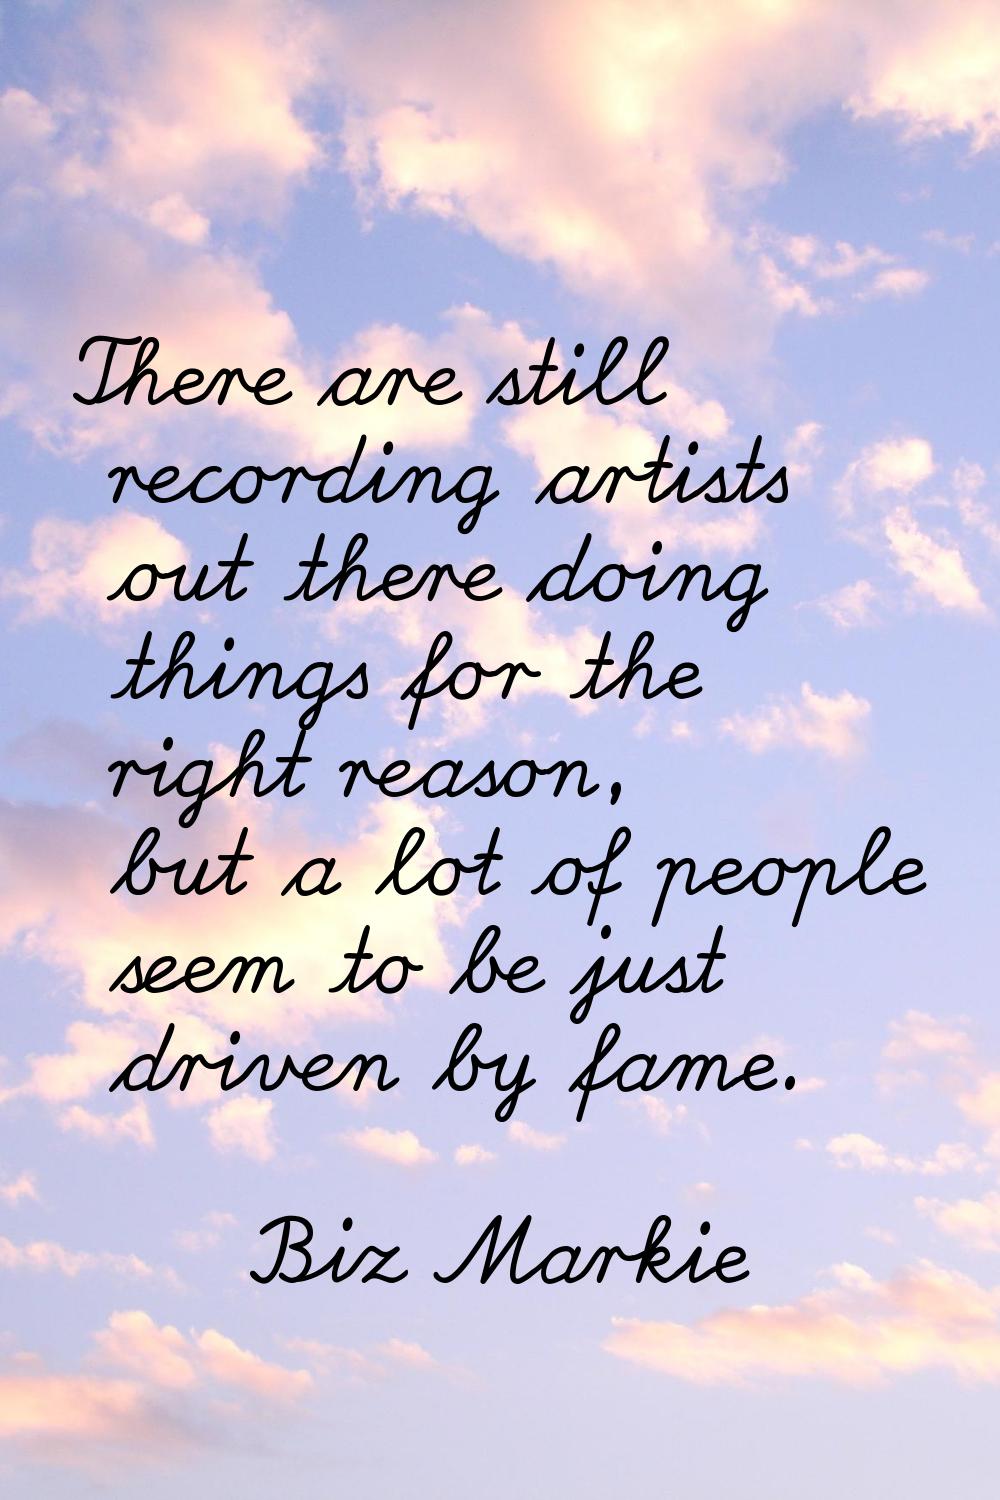 There are still recording artists out there doing things for the right reason, but a lot of people 